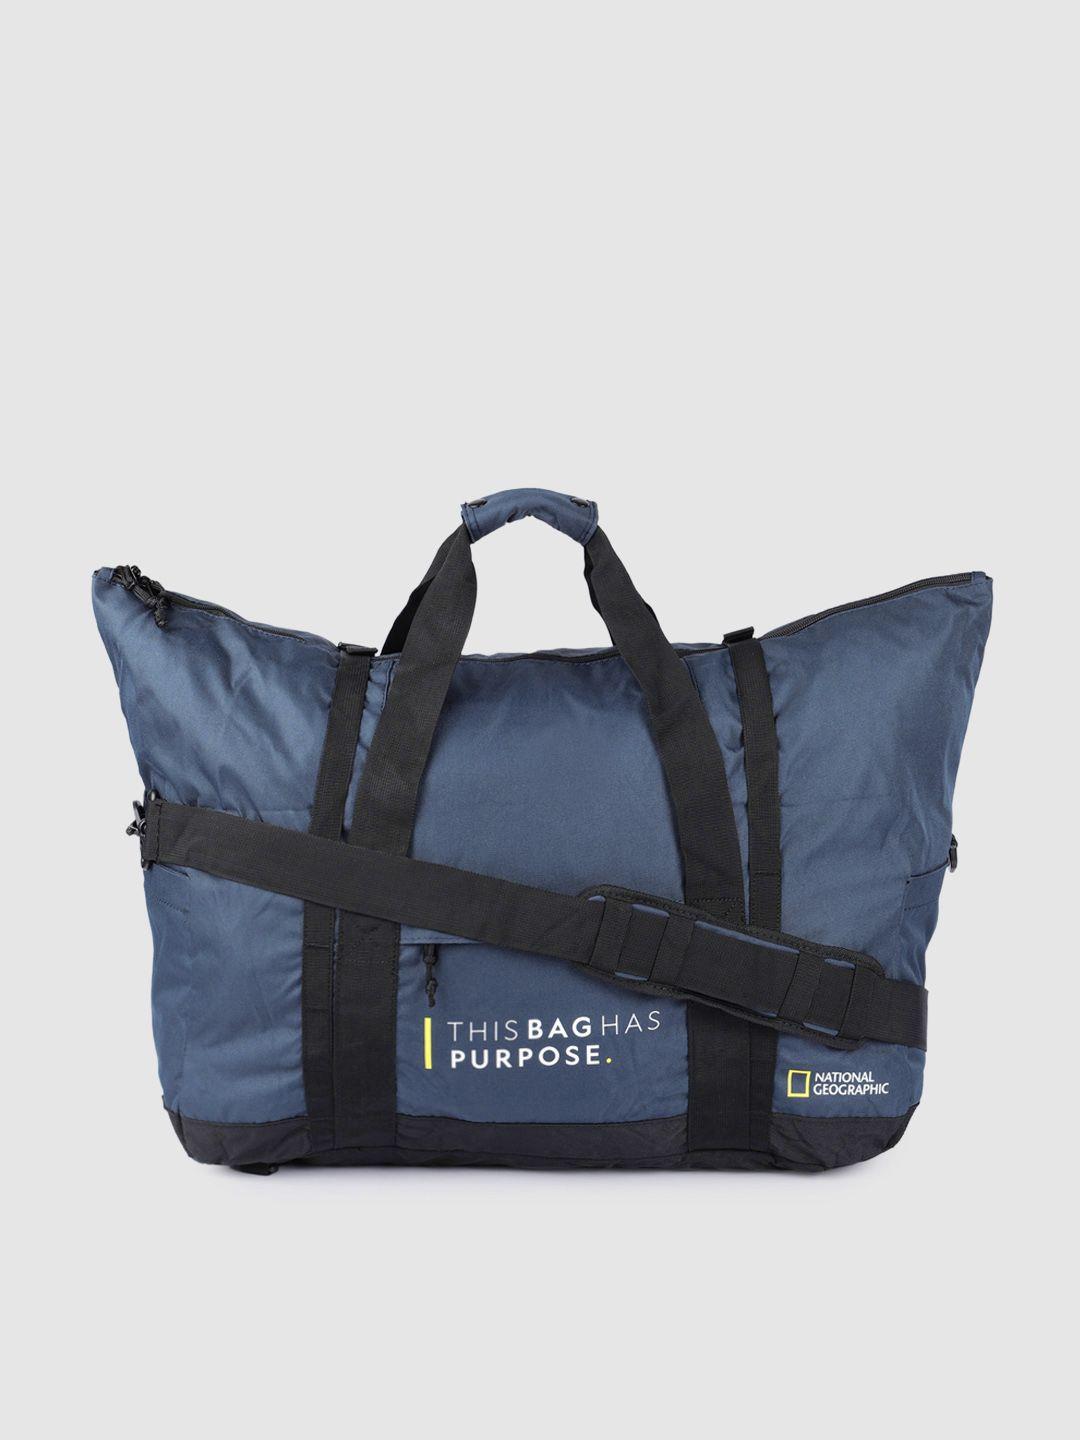 national-geographic-unisex-navy-blue-typography-duffle-bag